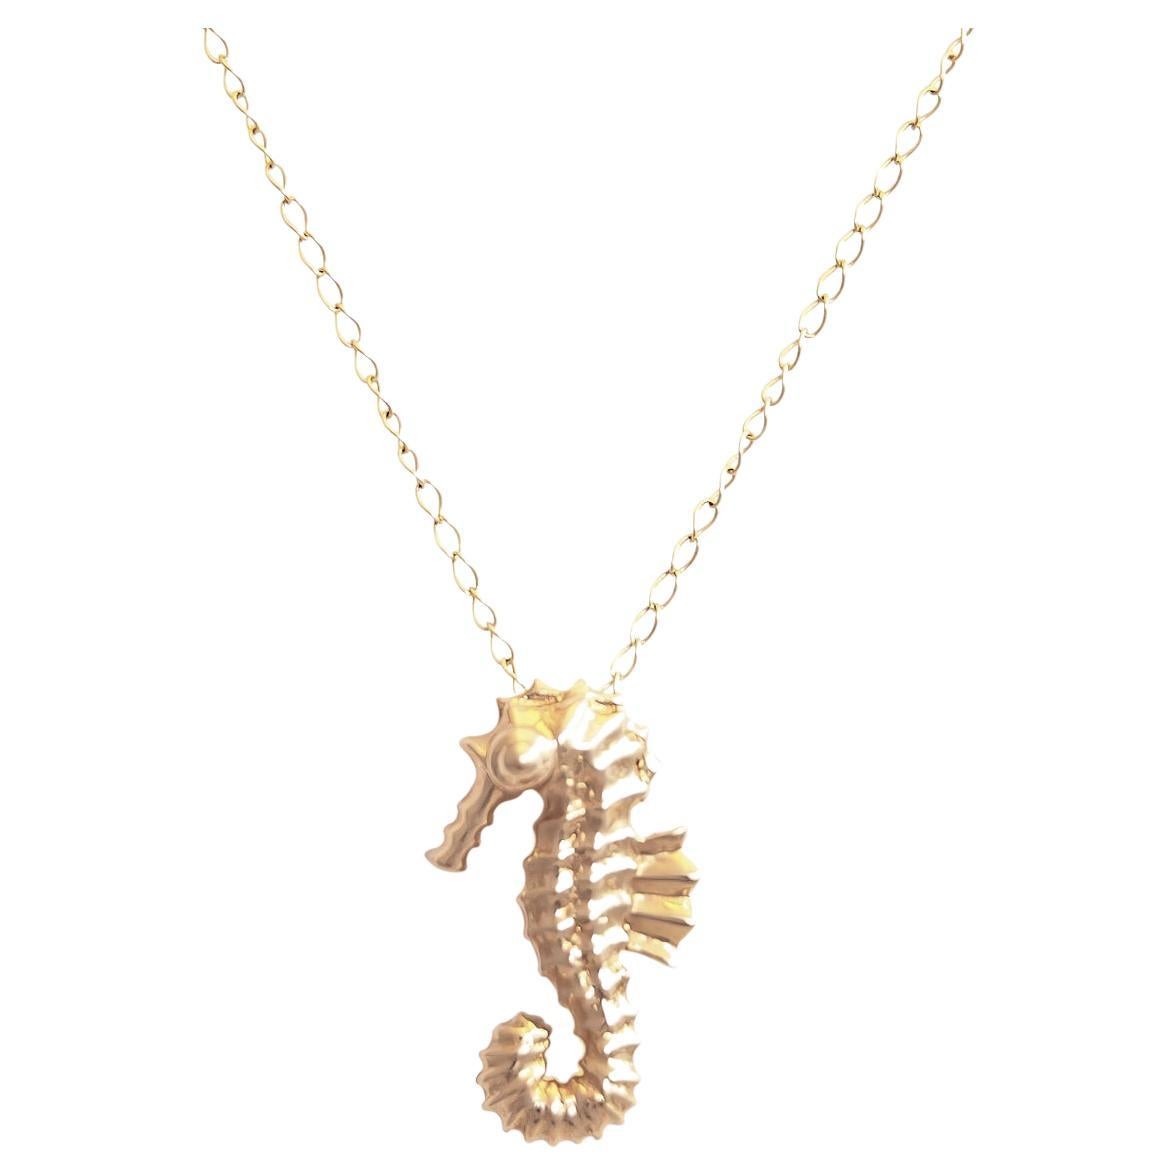 JHERWITT Solid 14k Yellow Gold Small Seahorse Pendant Necklace